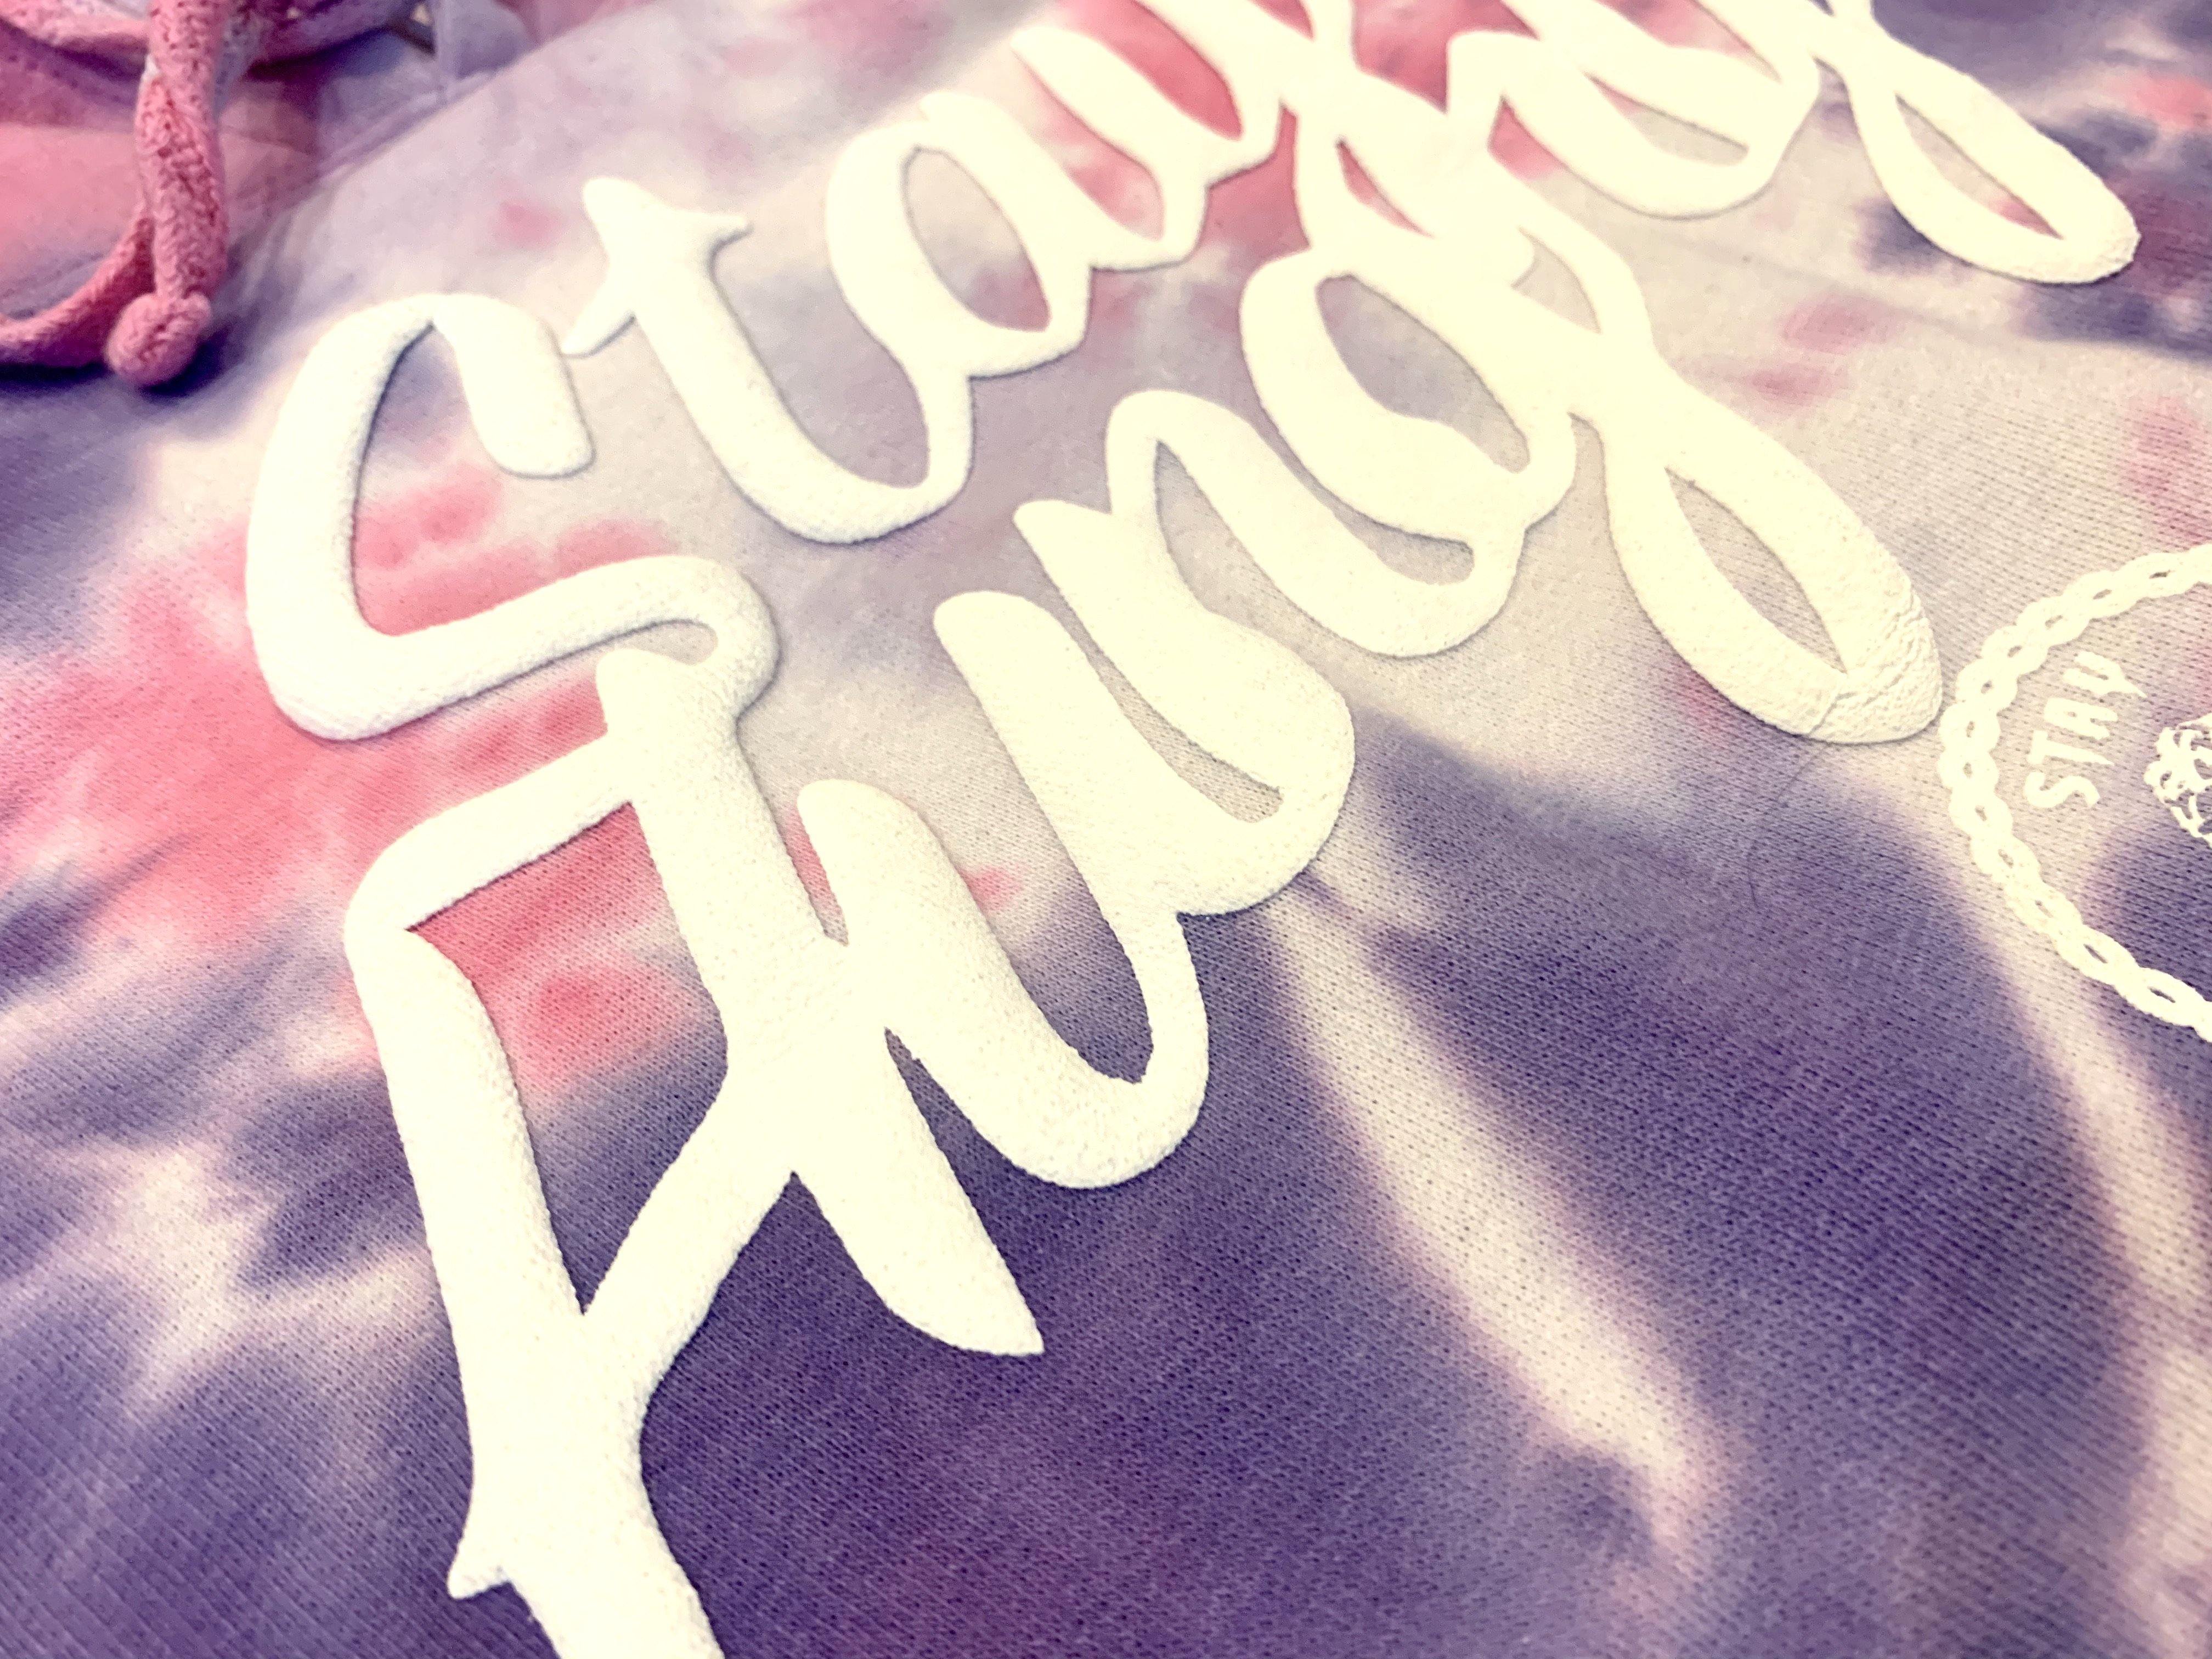 Signpainter Tie Dye Hood - Purple Icey (PREORDER ONLY) - Stay Hungry Cloth